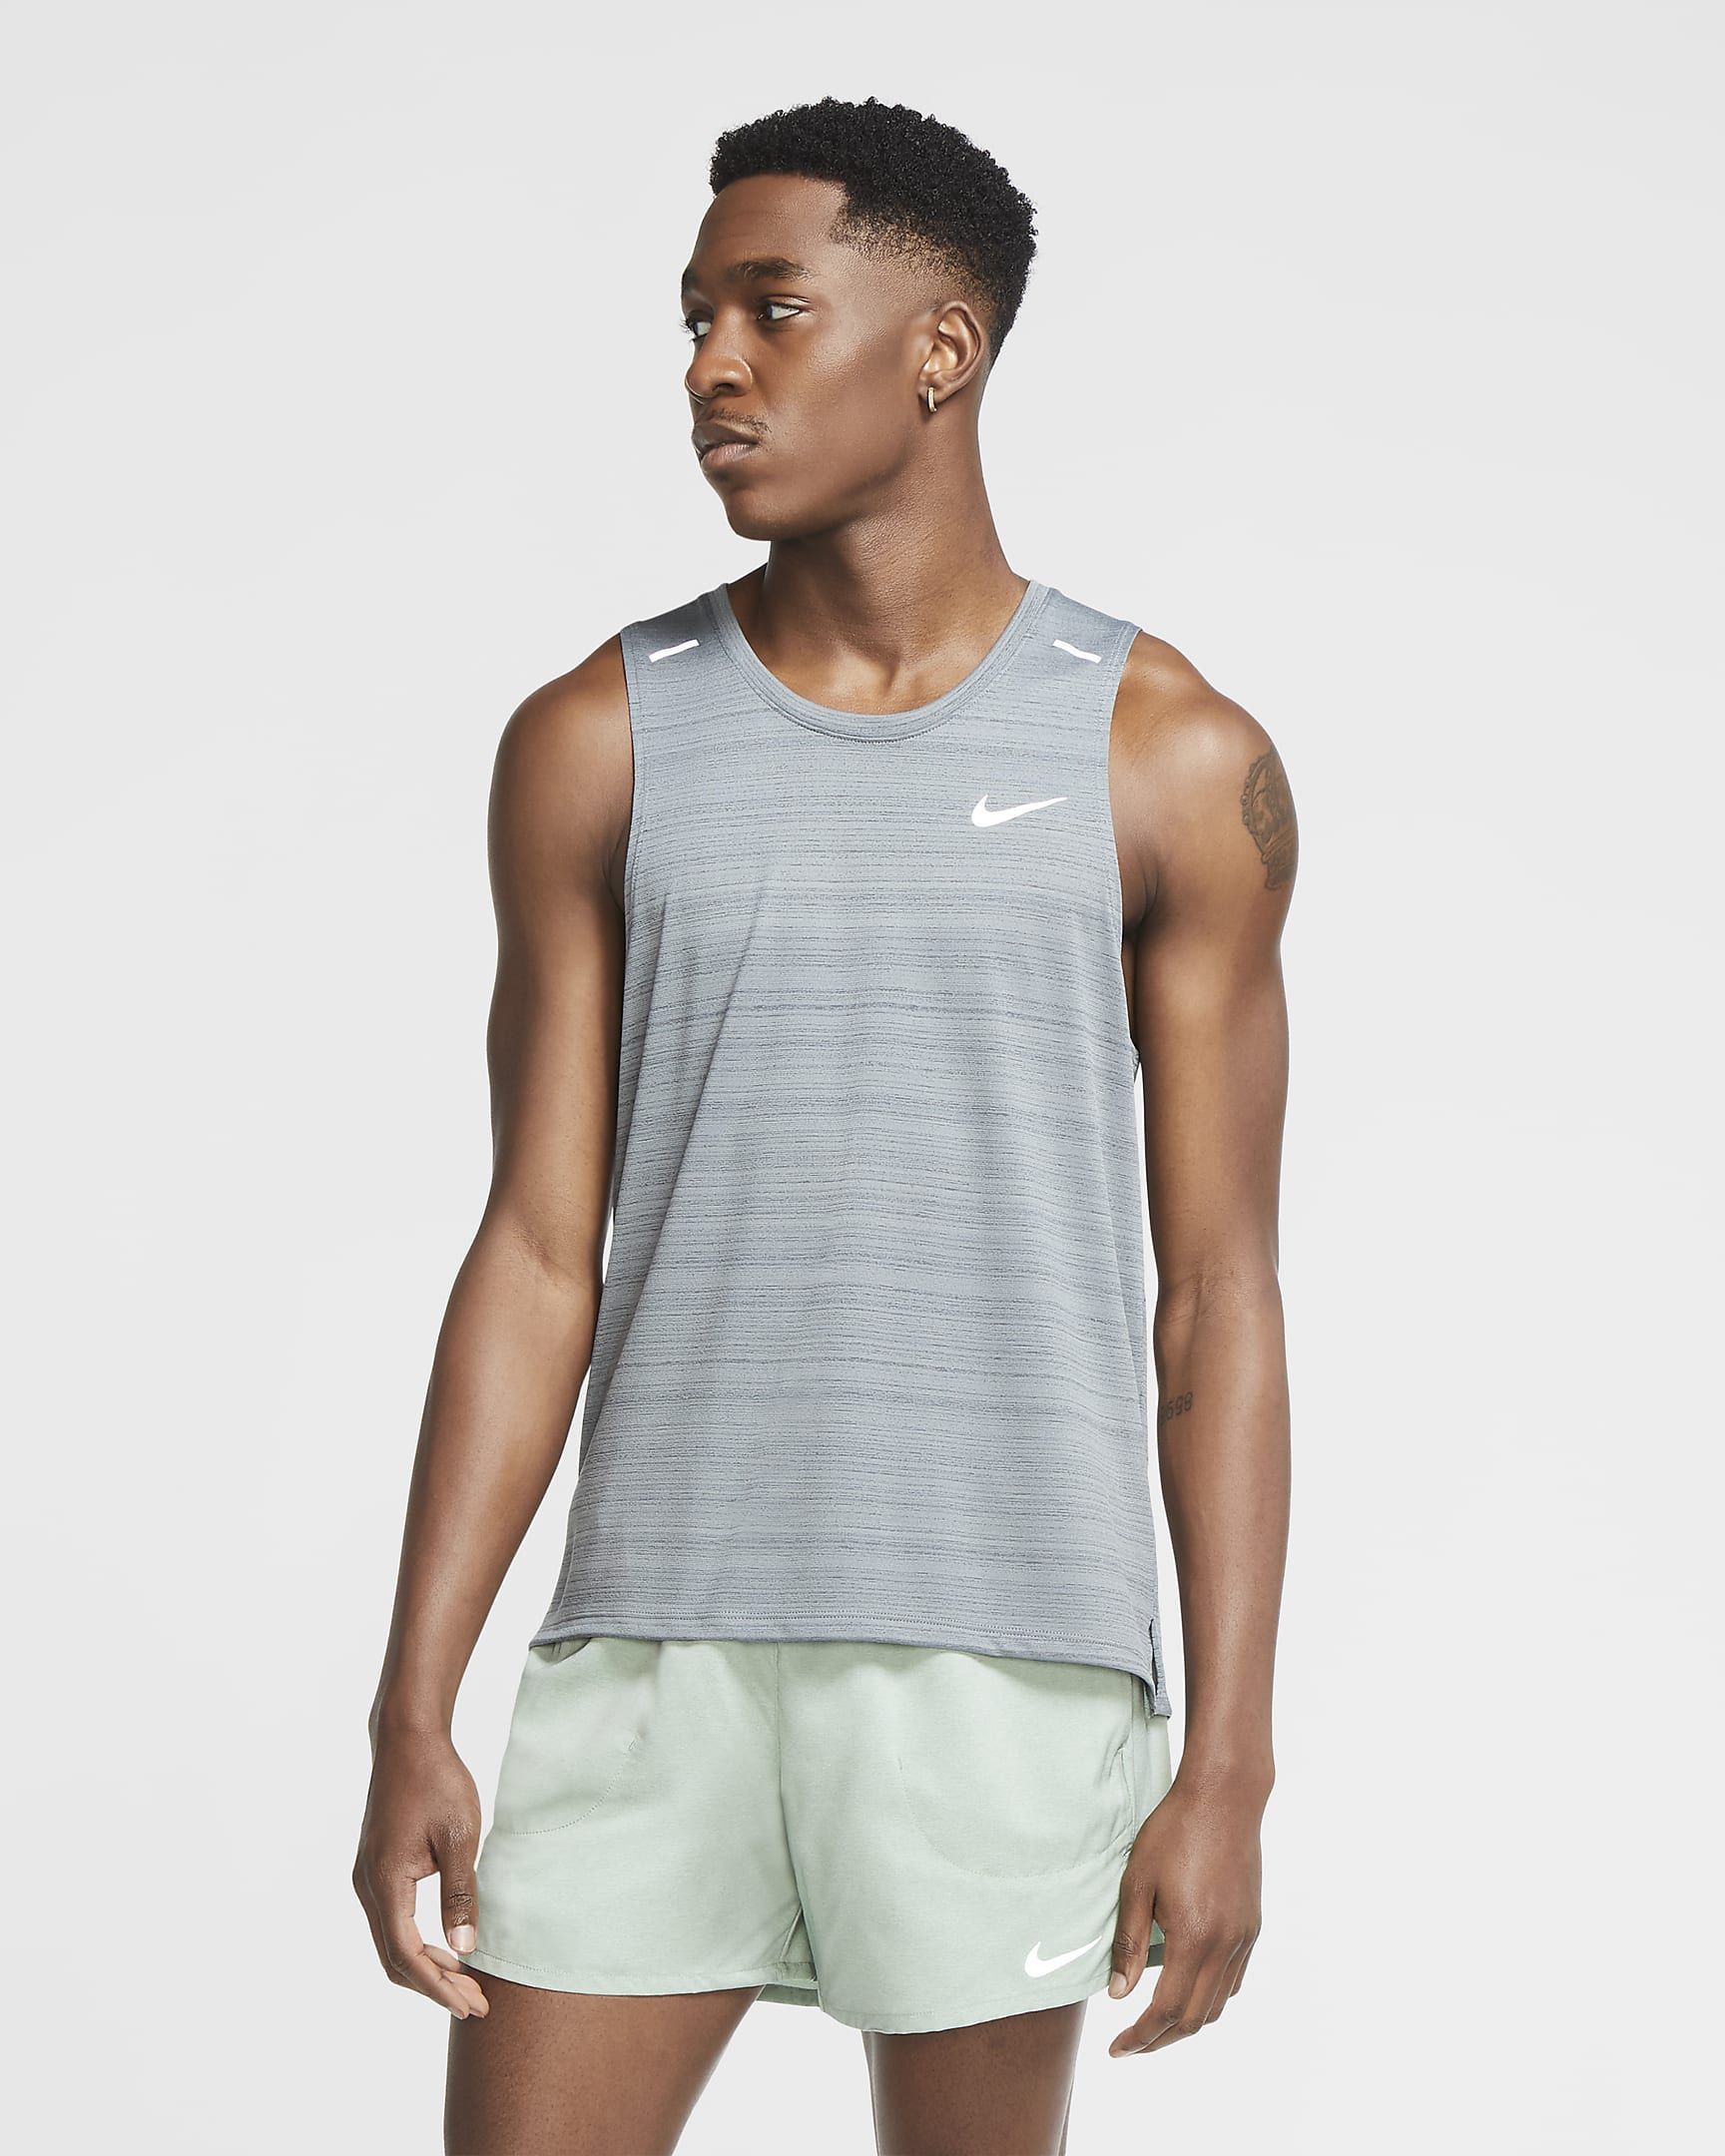 Beach Better Have My Money Sleeveless Tanks Tops Shirts Fit Mens 